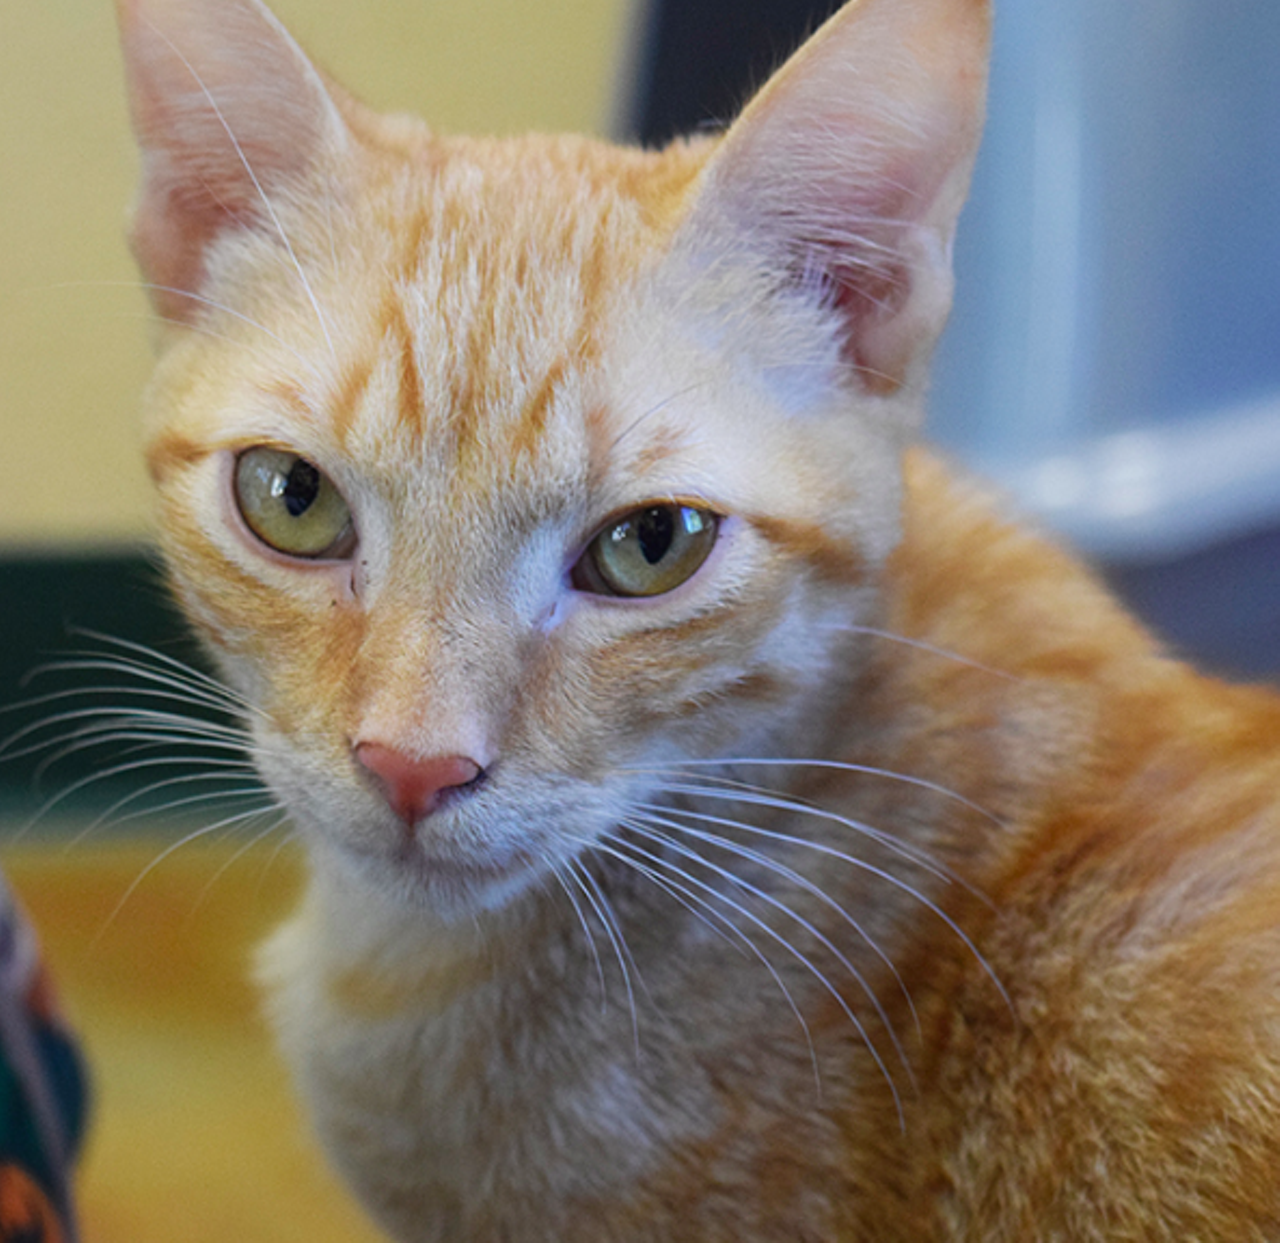 Quil
"Hi, I’m Quil! I’m a really mellow guy who enjoys hanging around and enjoying the little things in life. I have my  playful side as well and love anything I can chase!"